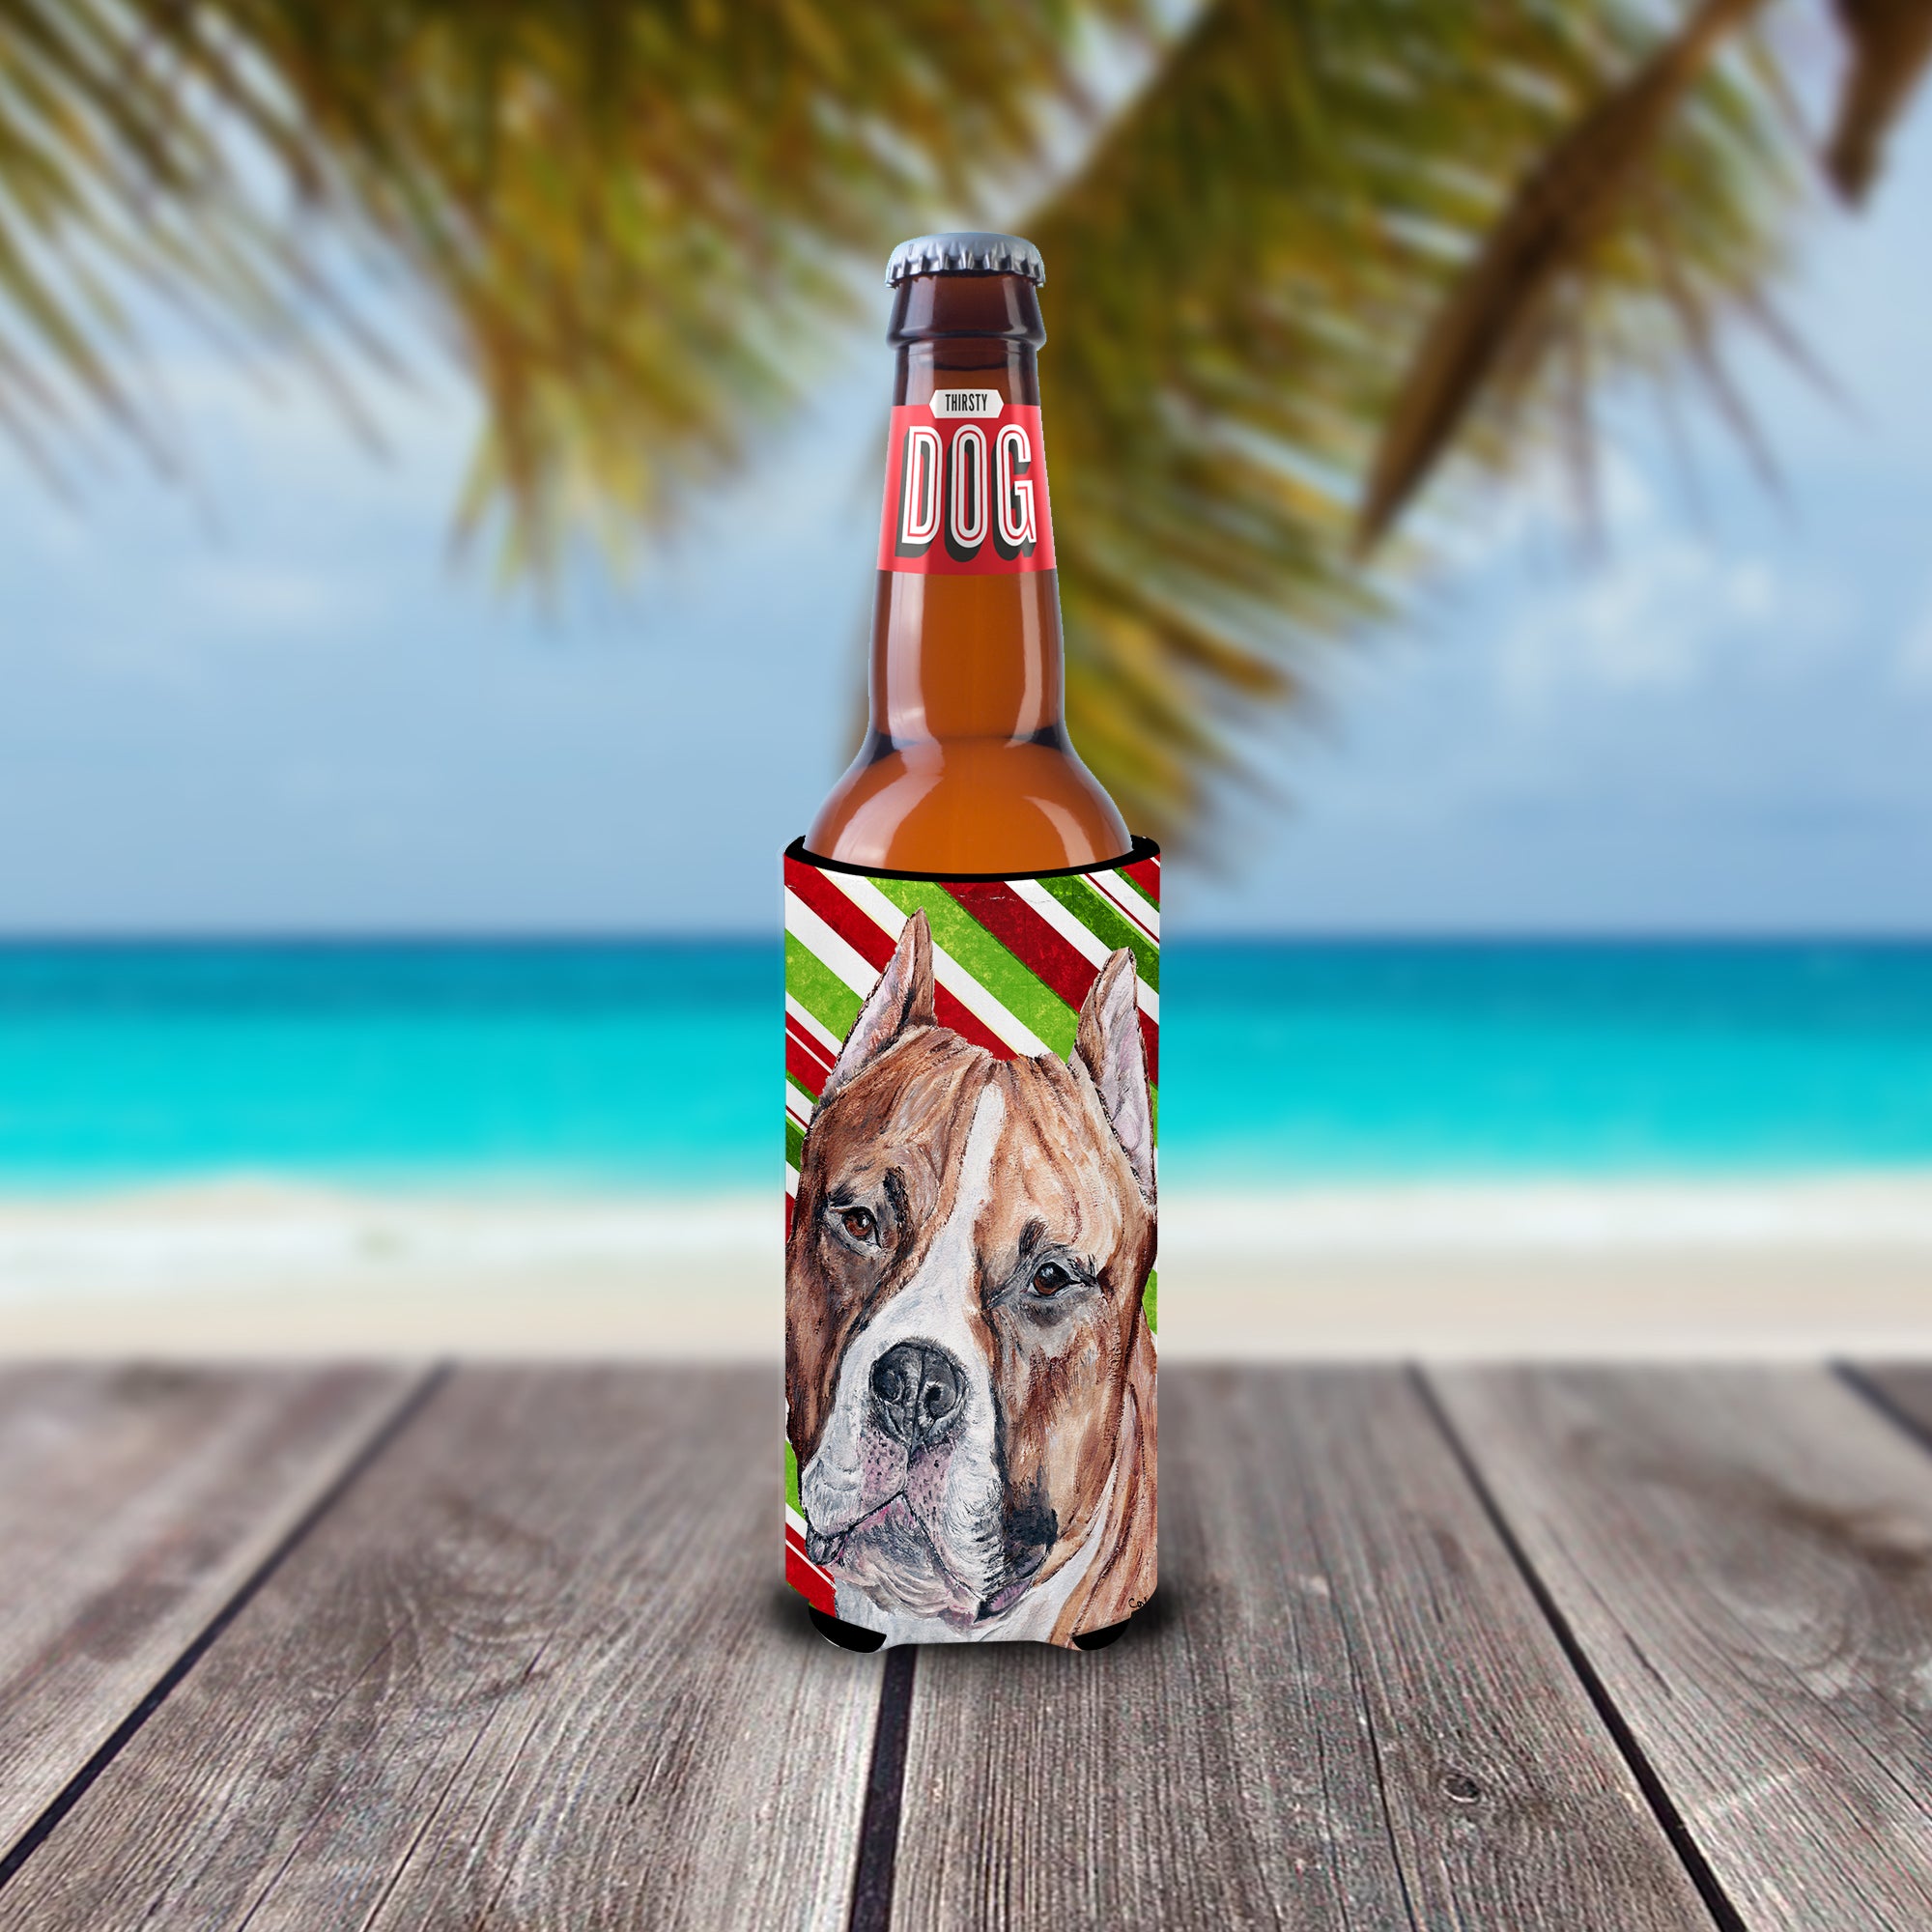 Staffordshire Bull Terrier Staffie Candy Cane Christmas Ultra Beverage Isolateurs pour canettes minces SC9800MUK